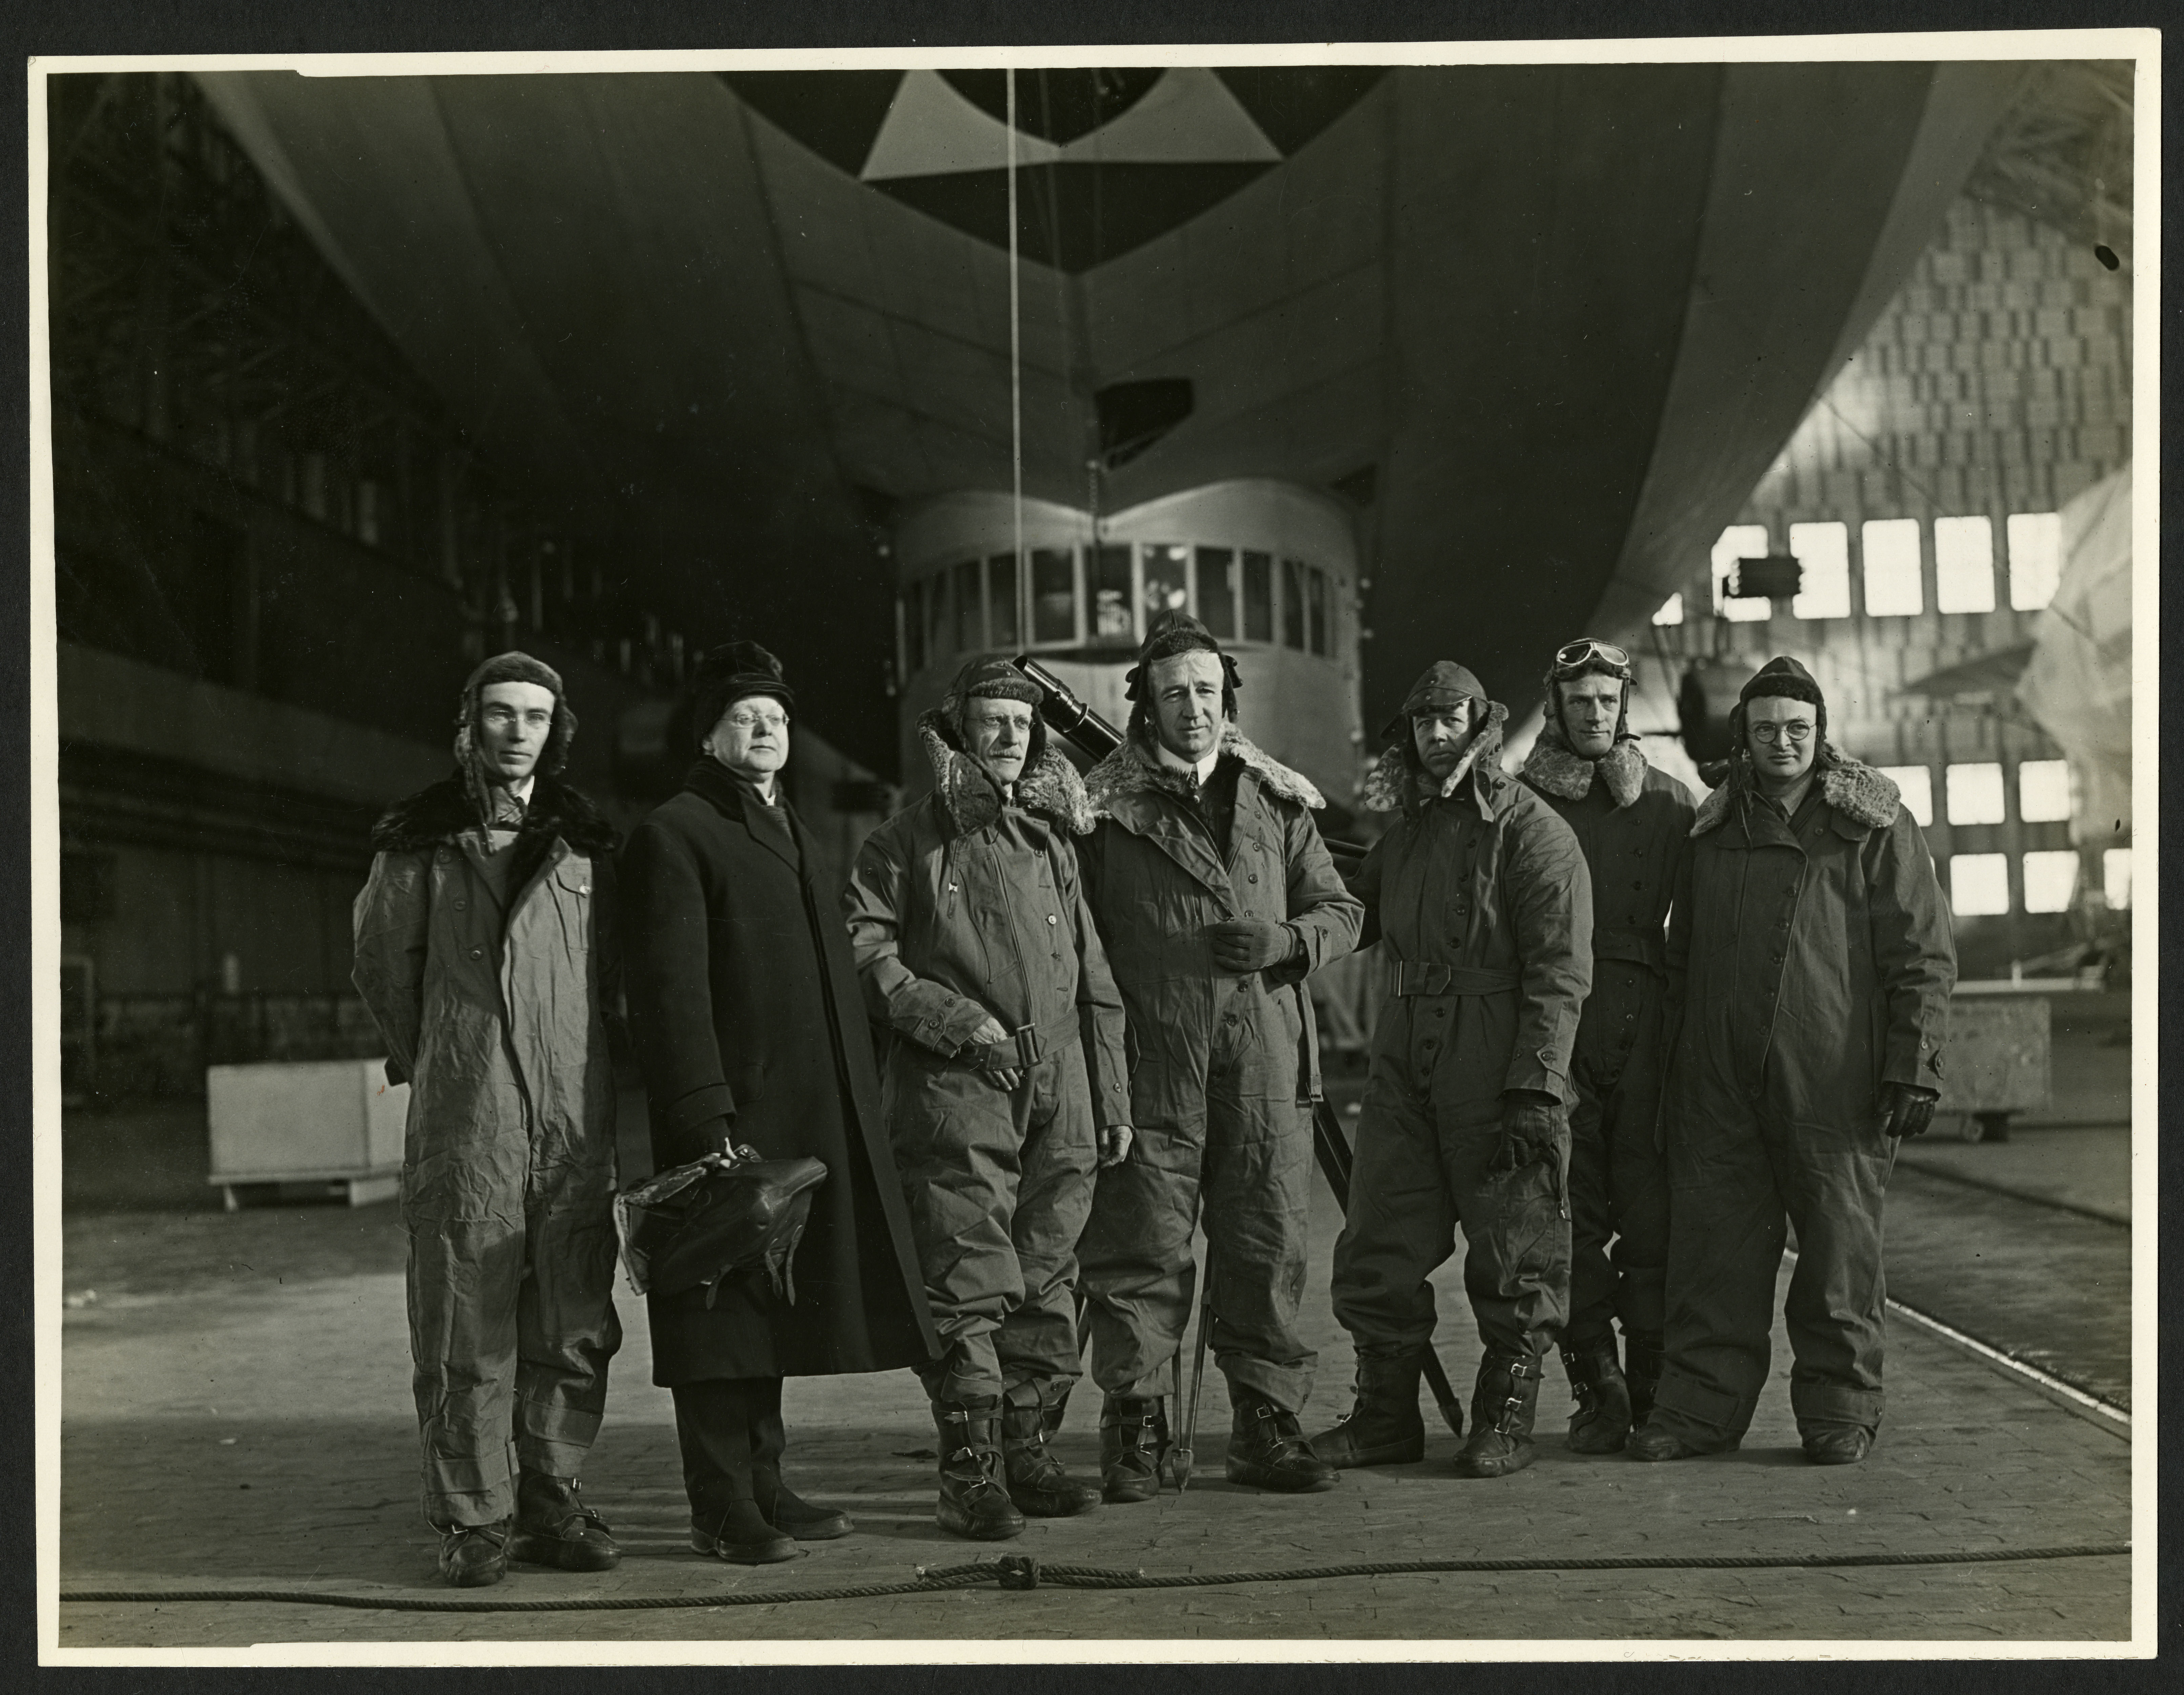 B&W photo of 7 men posing, one in long, black coat and the rest in flight jumpsuits